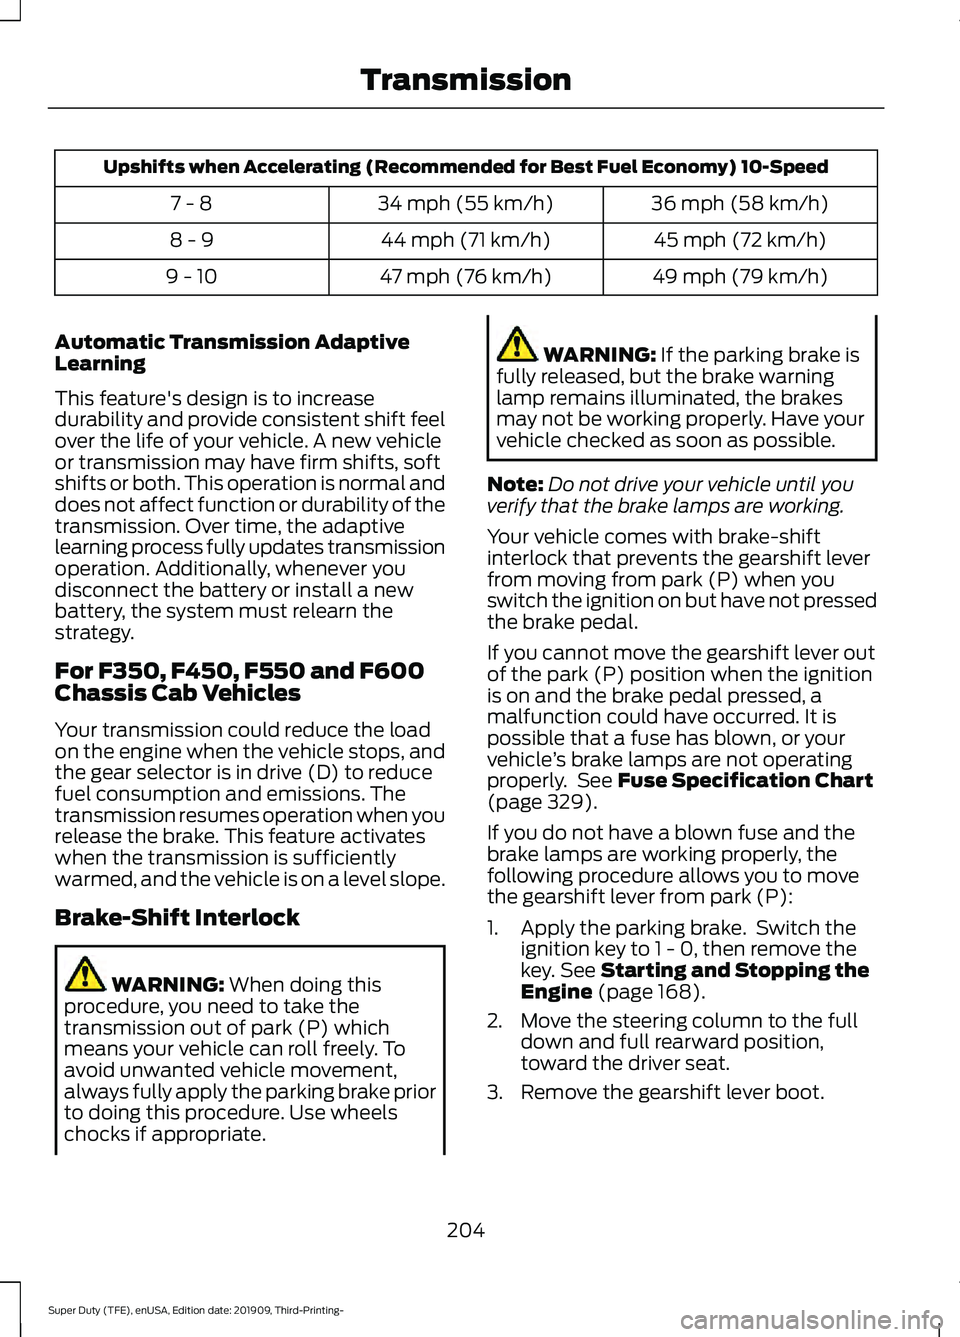 FORD F-450 2020  Owners Manual Upshifts when Accelerating (Recommended for Best Fuel Economy) 10-Speed
36 mph (58 km/h)
34 mph (55 km/h)
7 - 8
45 mph (72 km/h)
44 mph (71 km/h)
8 - 9
49 mph (79 km/h)
47 mph (76 km/h)
9 - 10
Automat